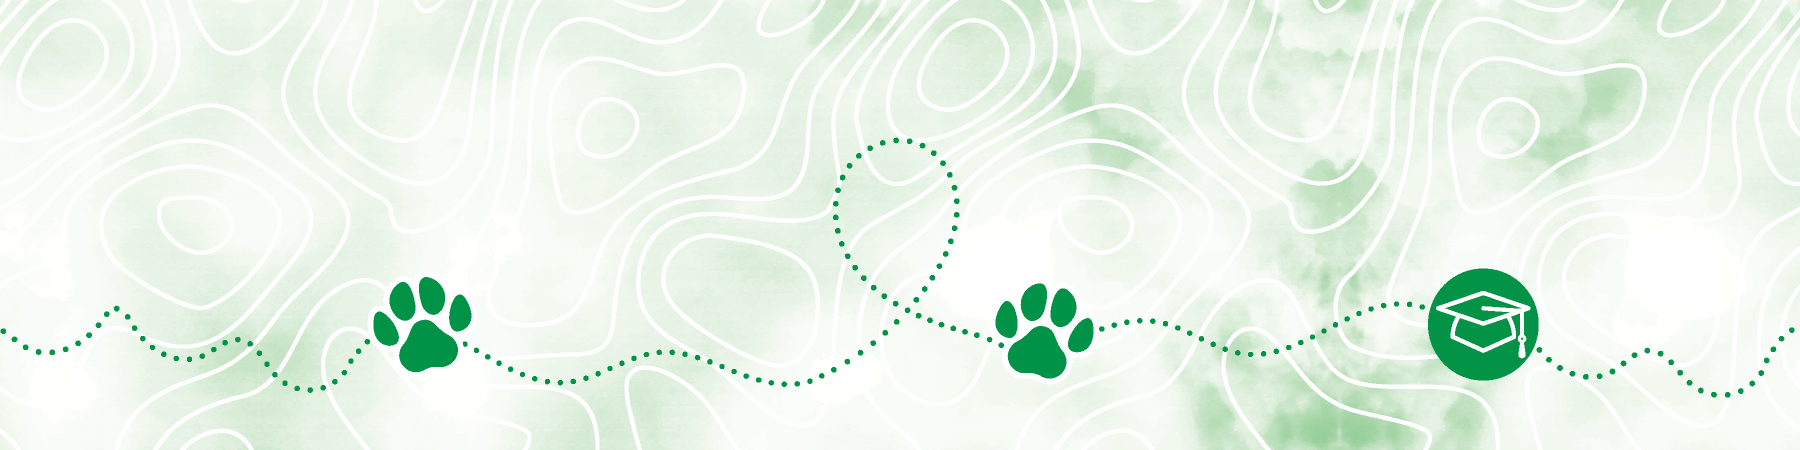 paws banner